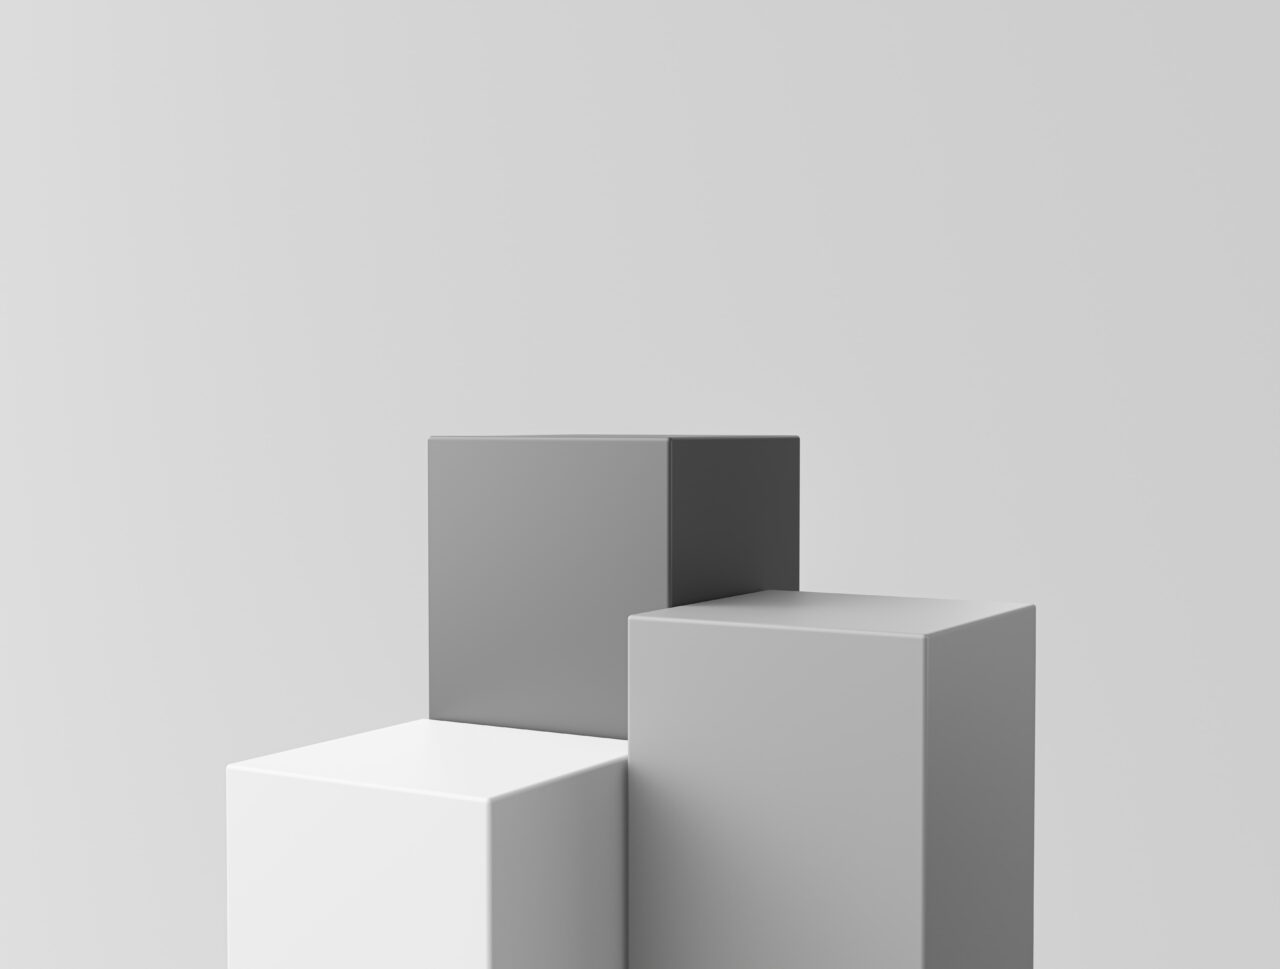 Three-dimensional cube on gray background.